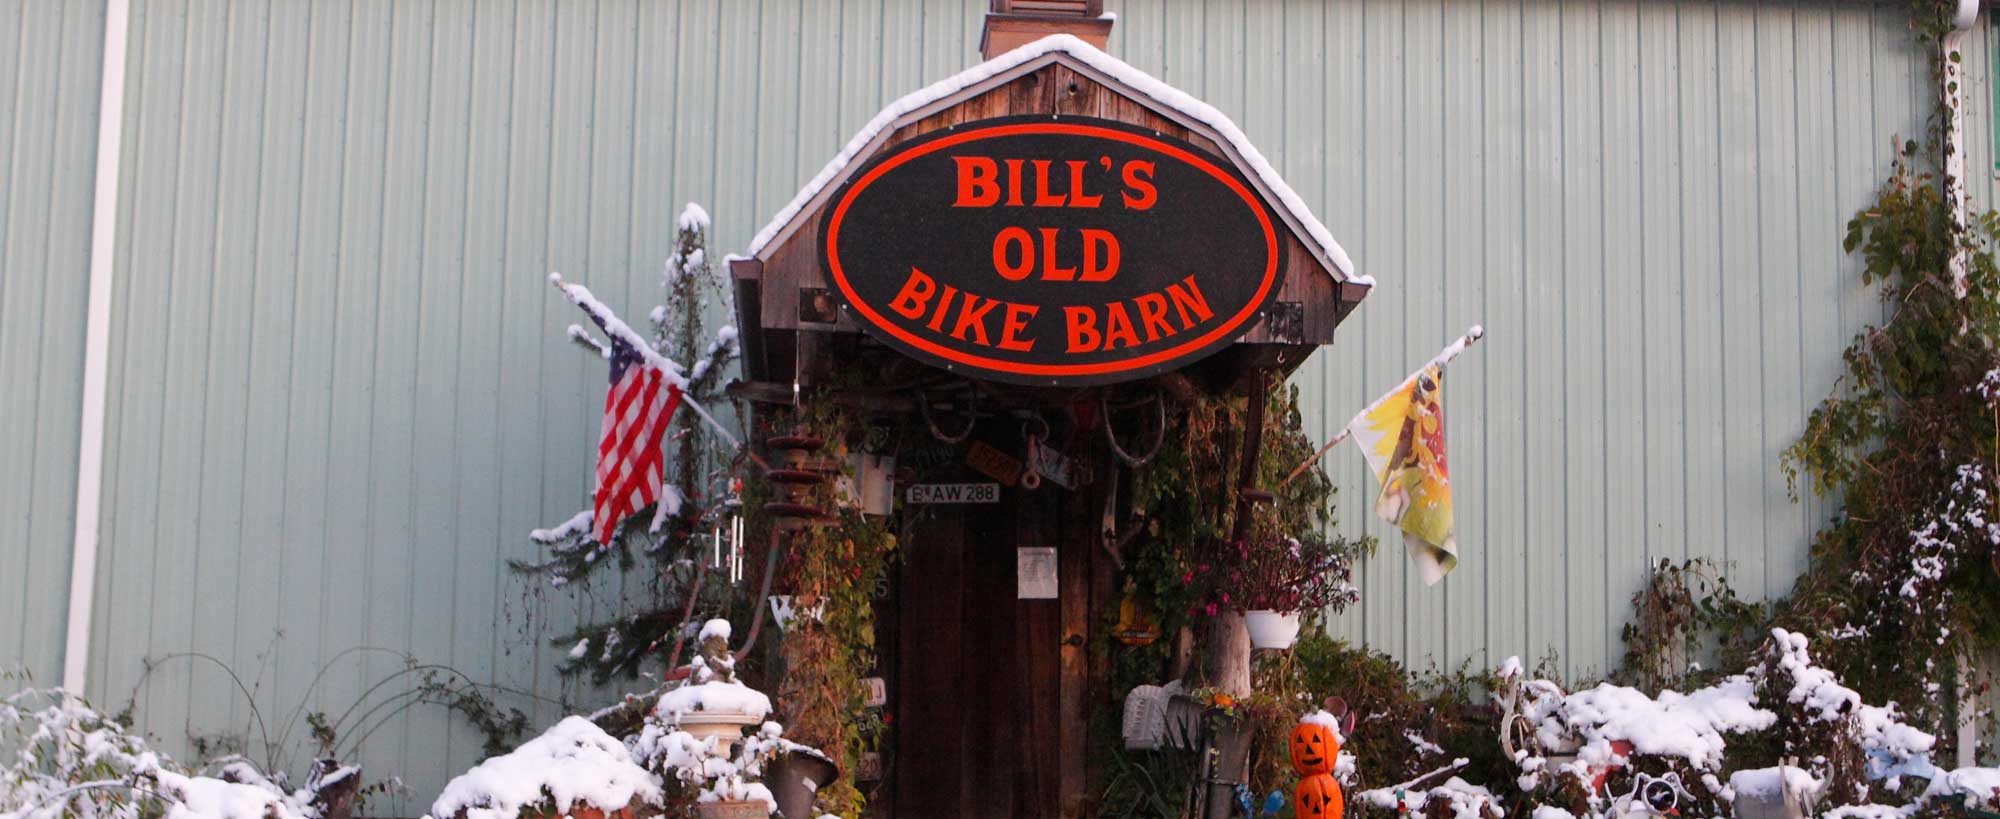 Visit Bill's Old Bike Barn. An experience you'll never forget